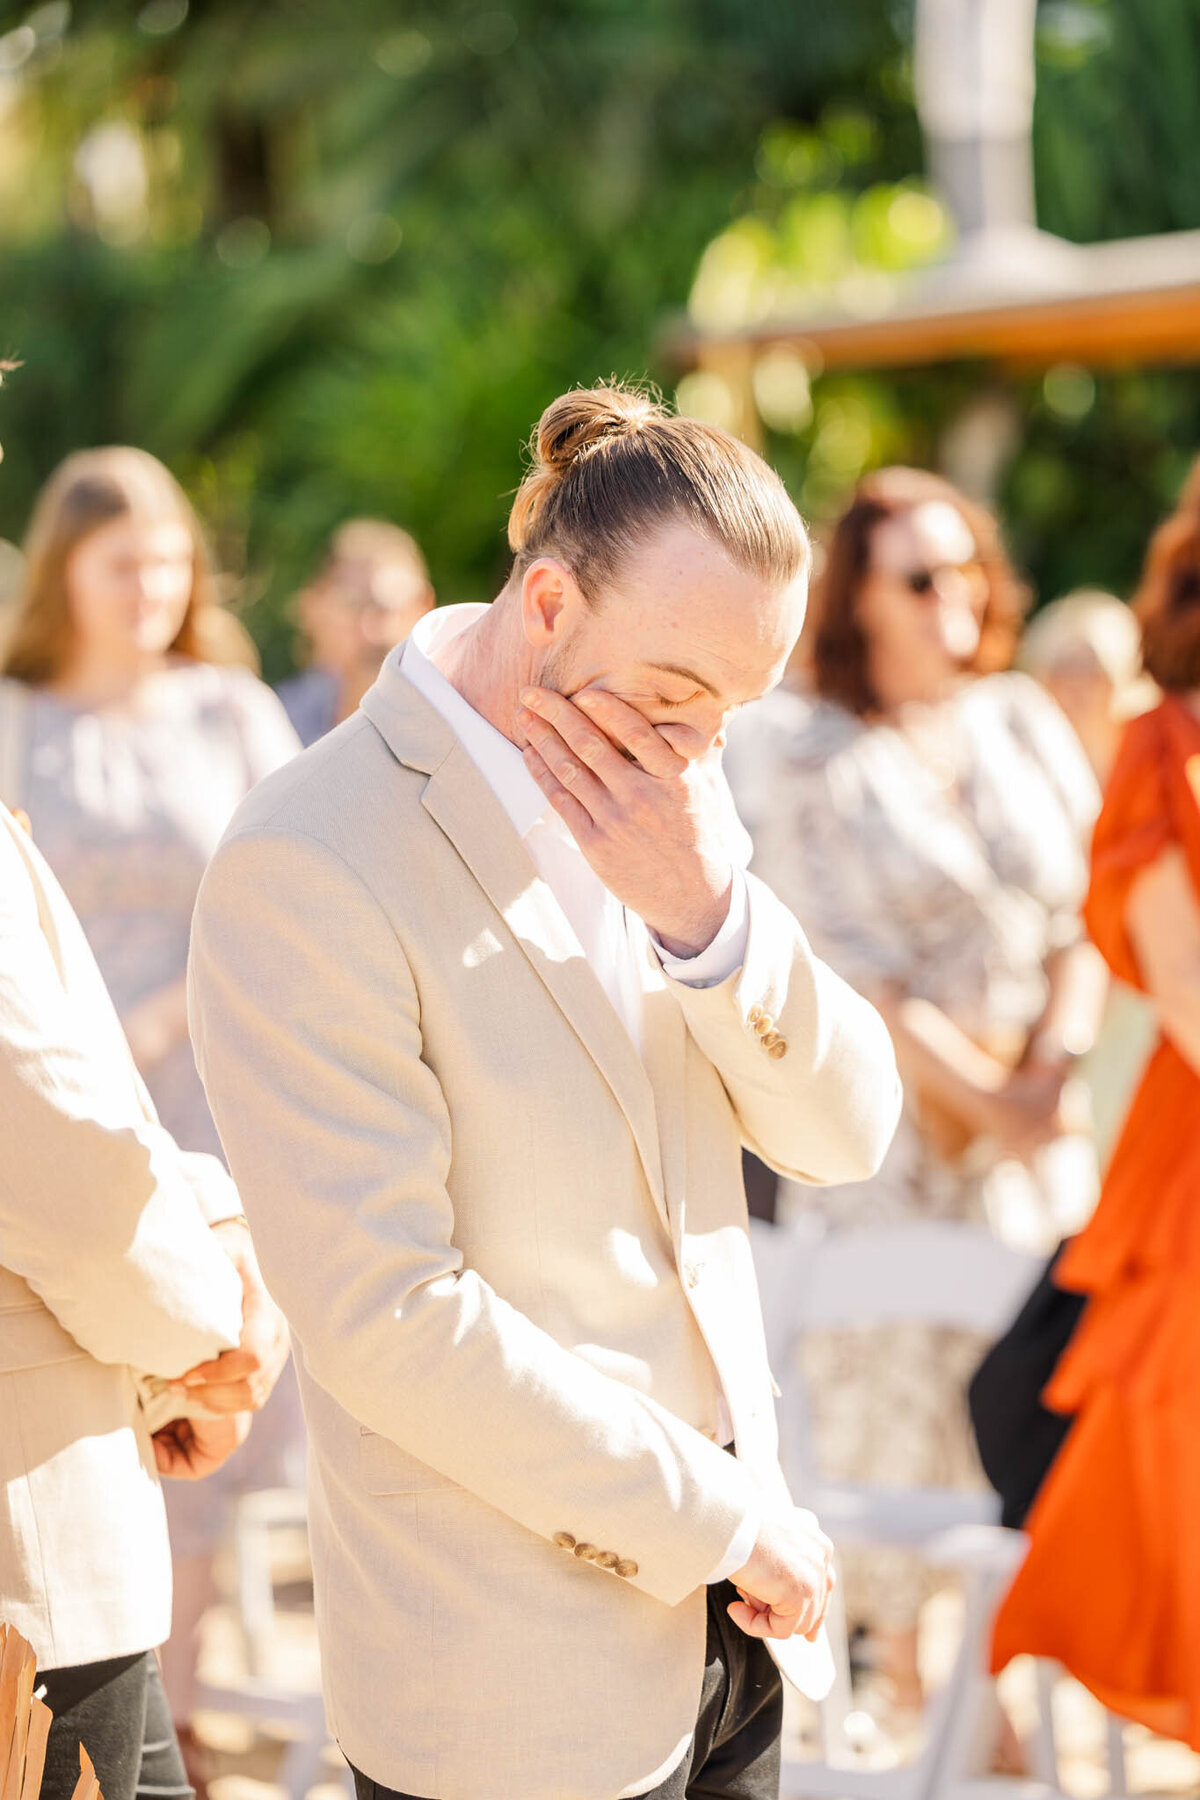 Emotional groom stands at the end of the ceremony, waiting for his bride to walk down the isle to him